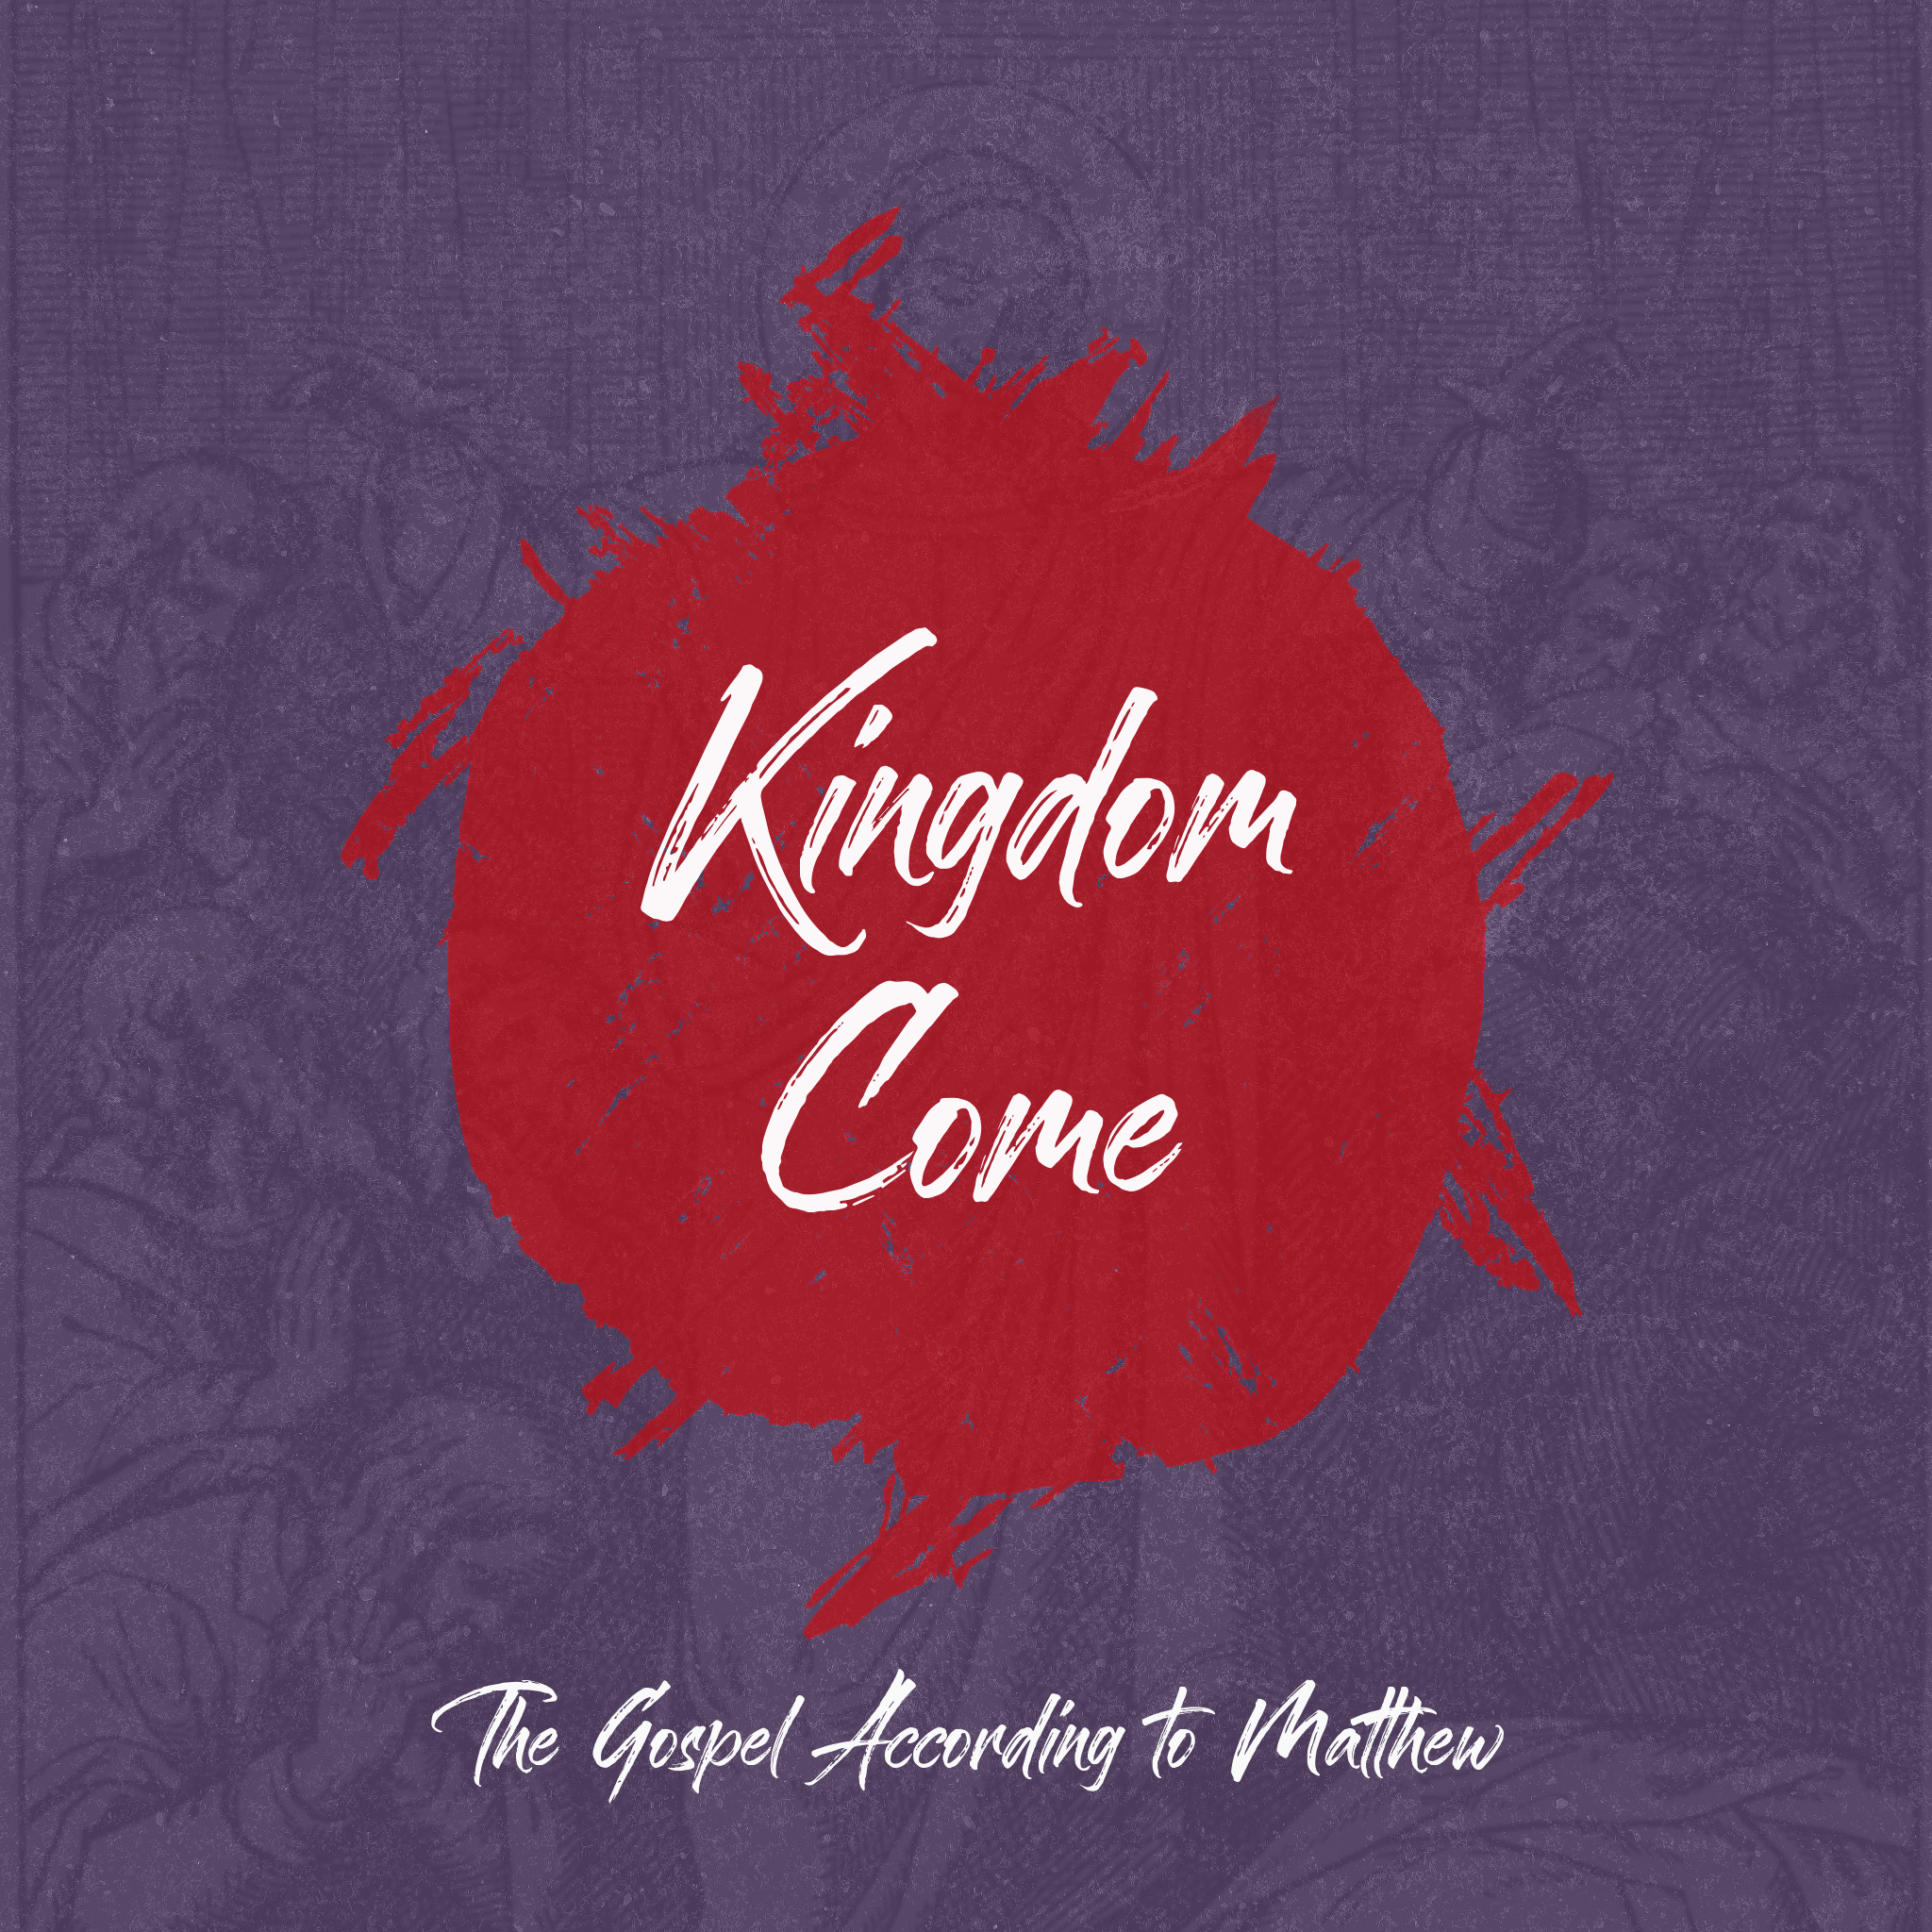 Featured image for “Entering The Kingdom Of Heaven Through Baptism And Repentance”